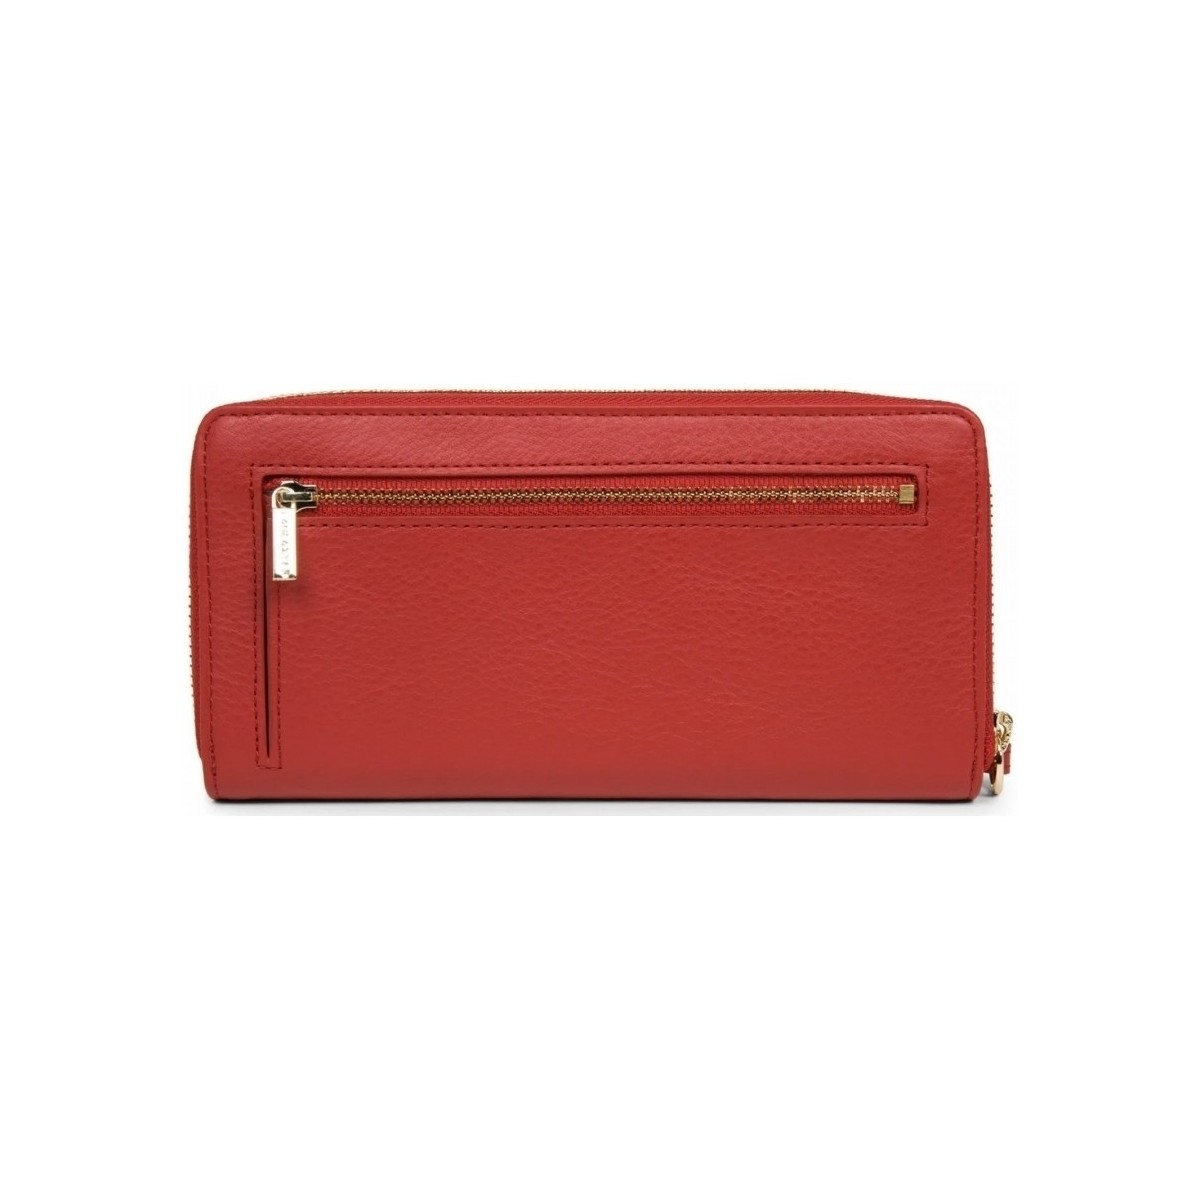 LANCASTER Rouge Portefeuille Ref 50462 rouge 19*10*2.5 xPrEDzHo